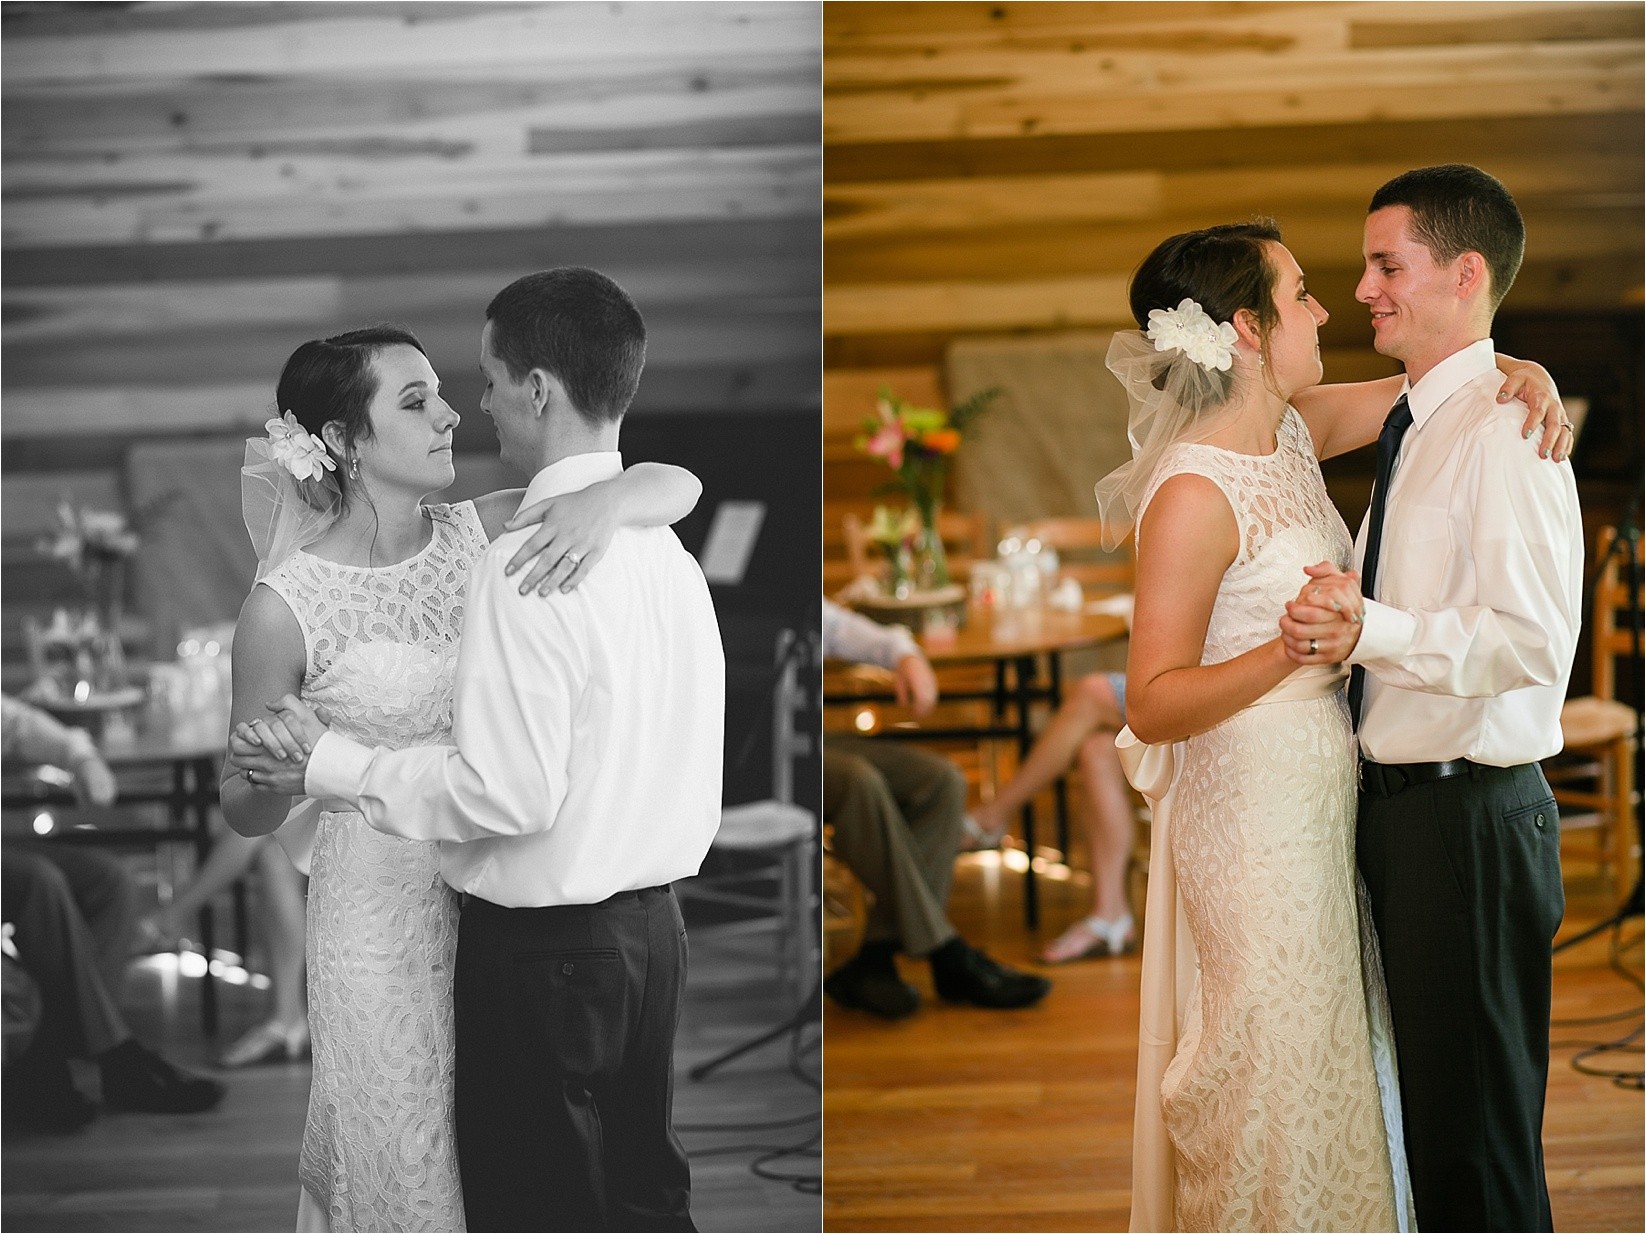 First dance together at Caroline and Evans mountain wedding at yesterday spaces in asheville leicester north carolina